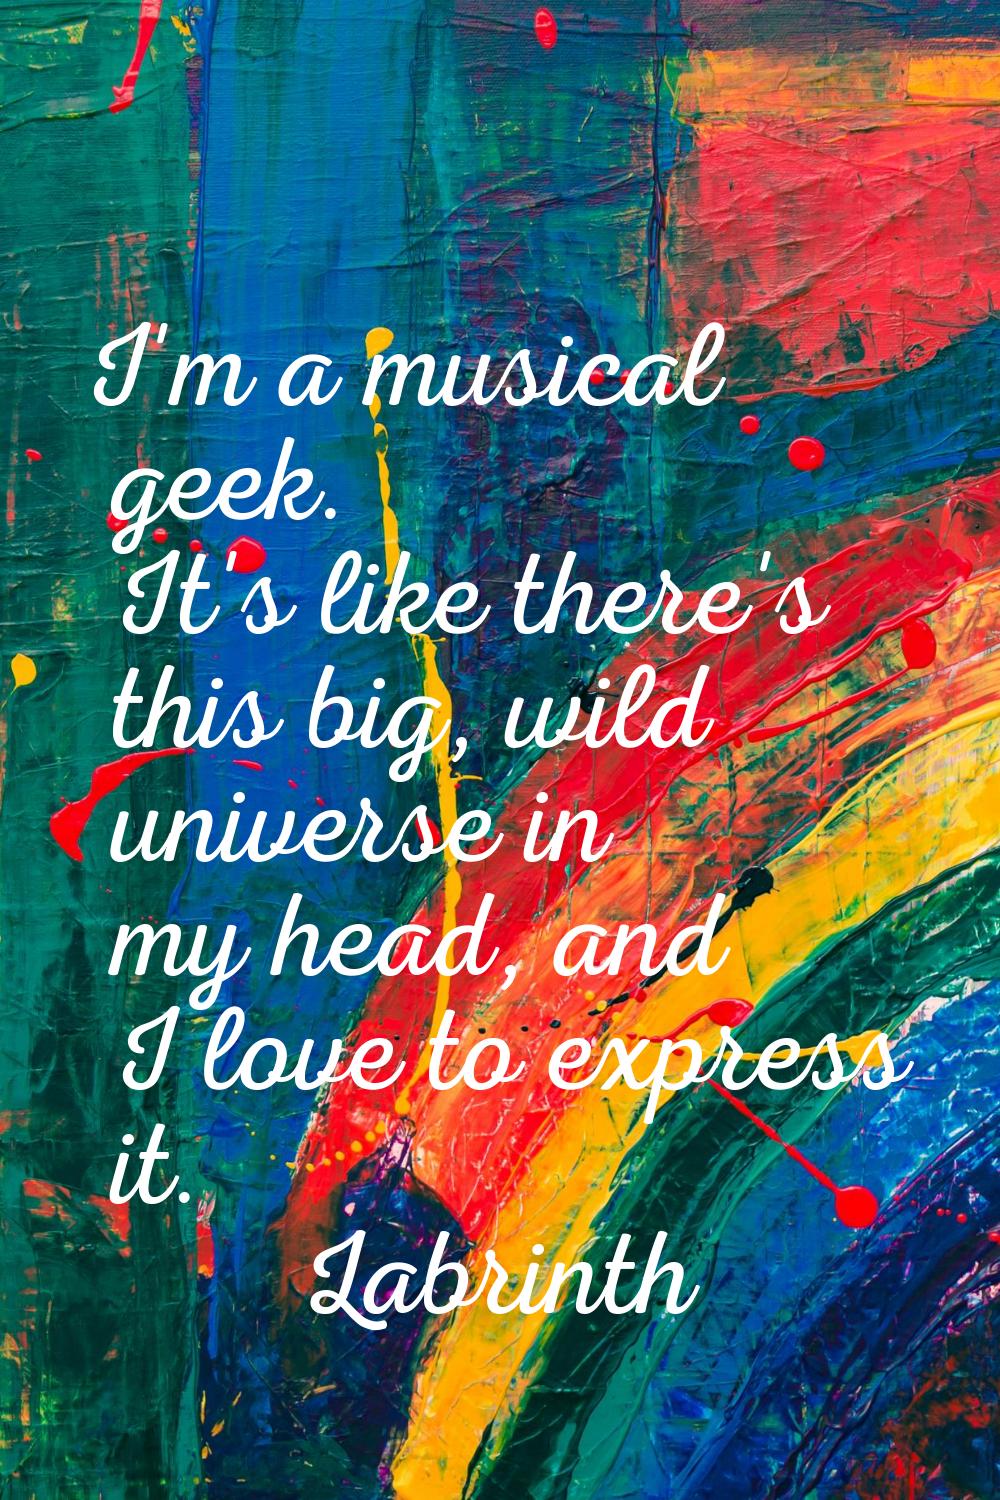 I'm a musical geek. It's like there's this big, wild universe in my head, and I love to express it.